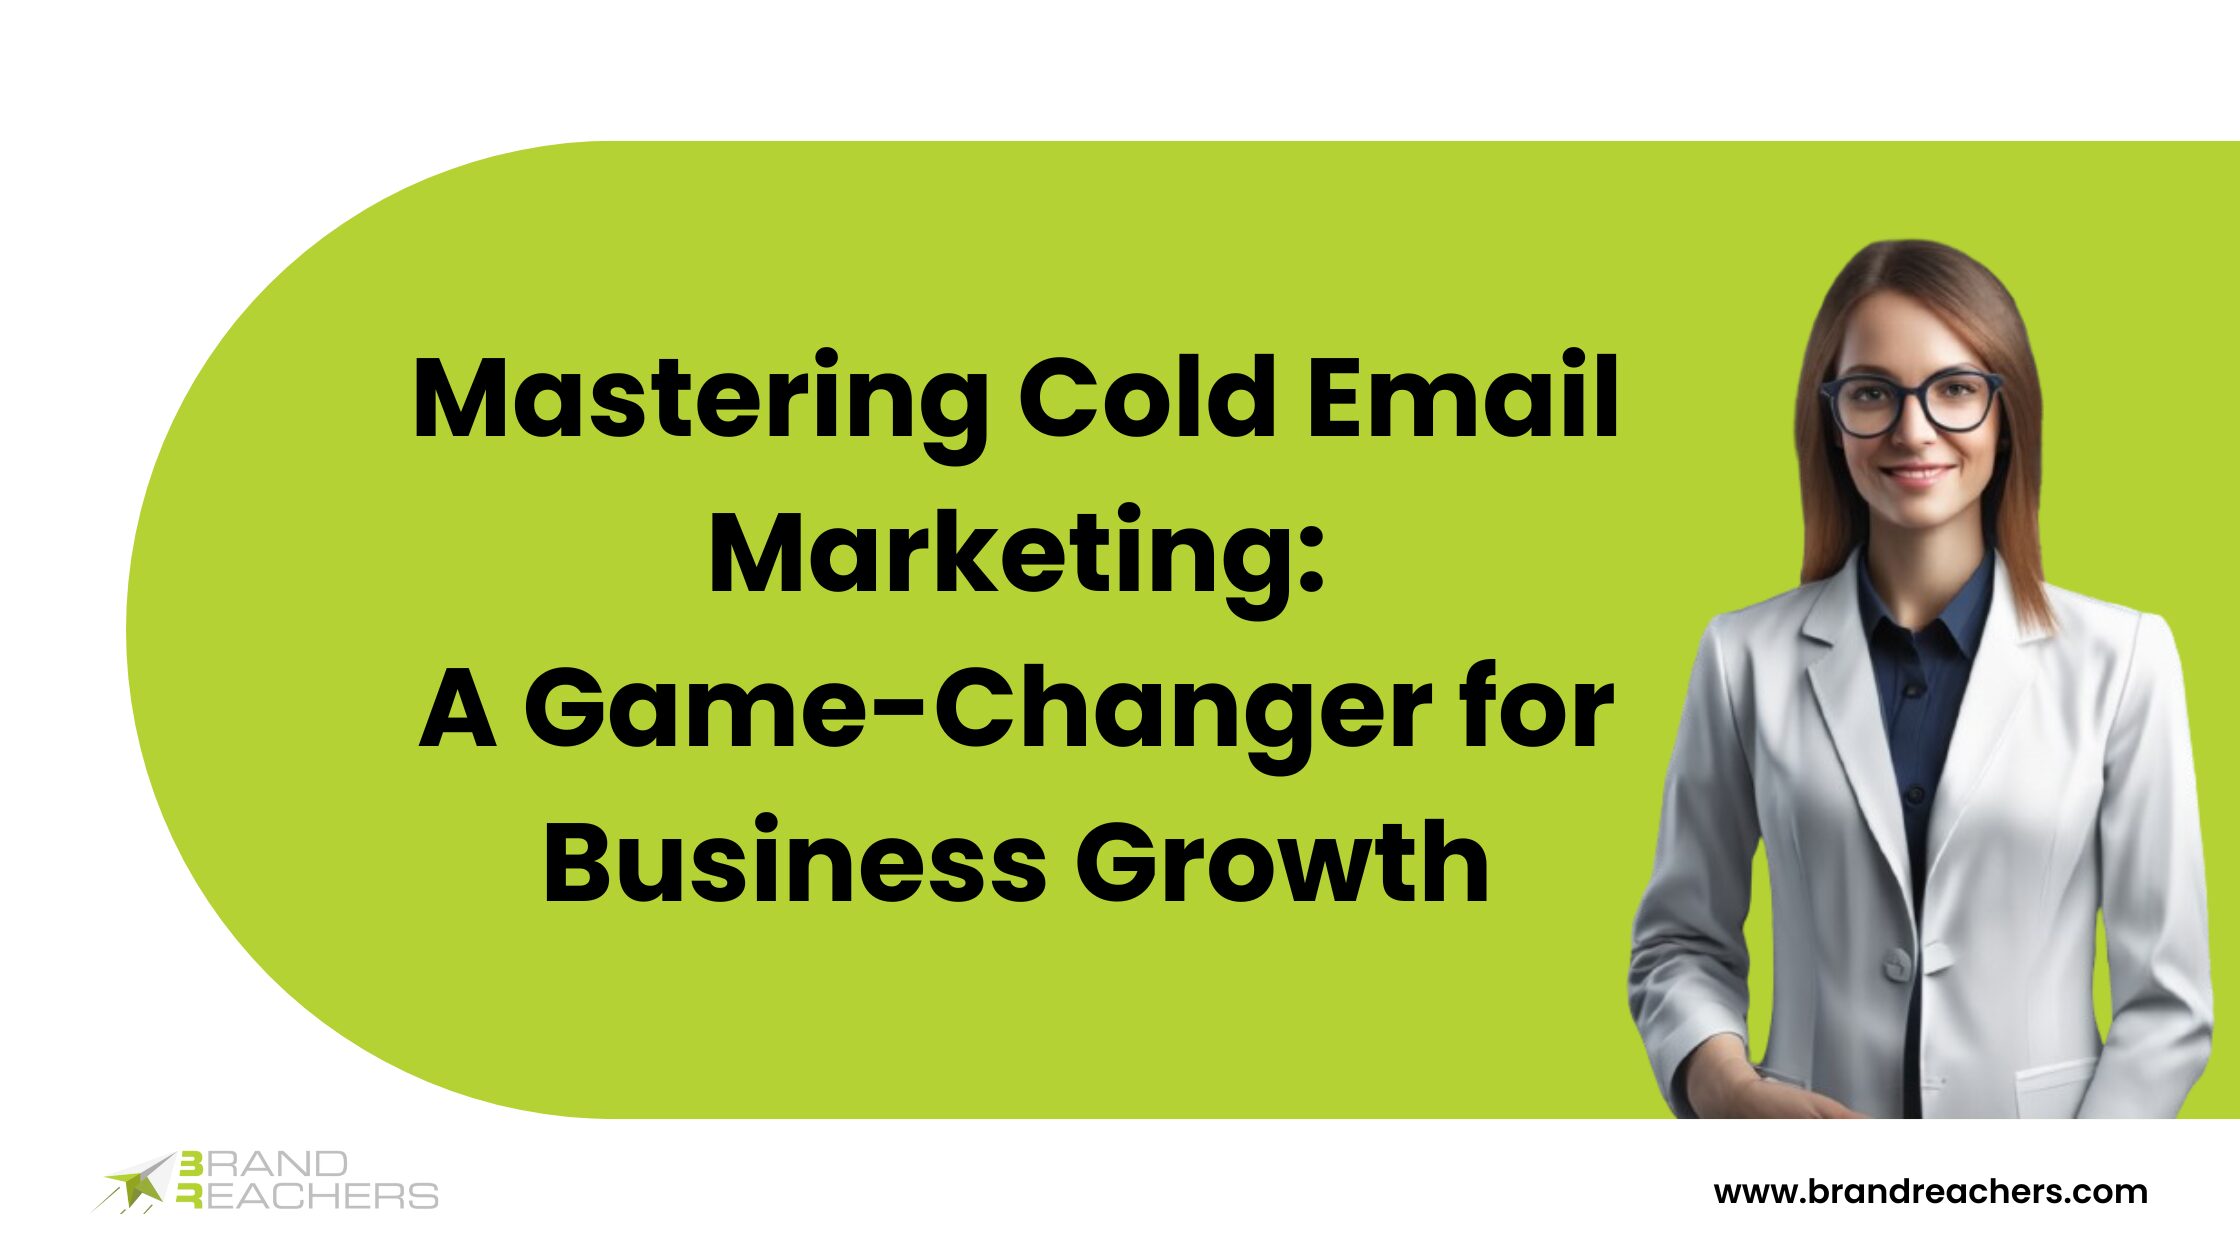 Mastering Cold Email Marketing: A Game-Changer for Business Growth